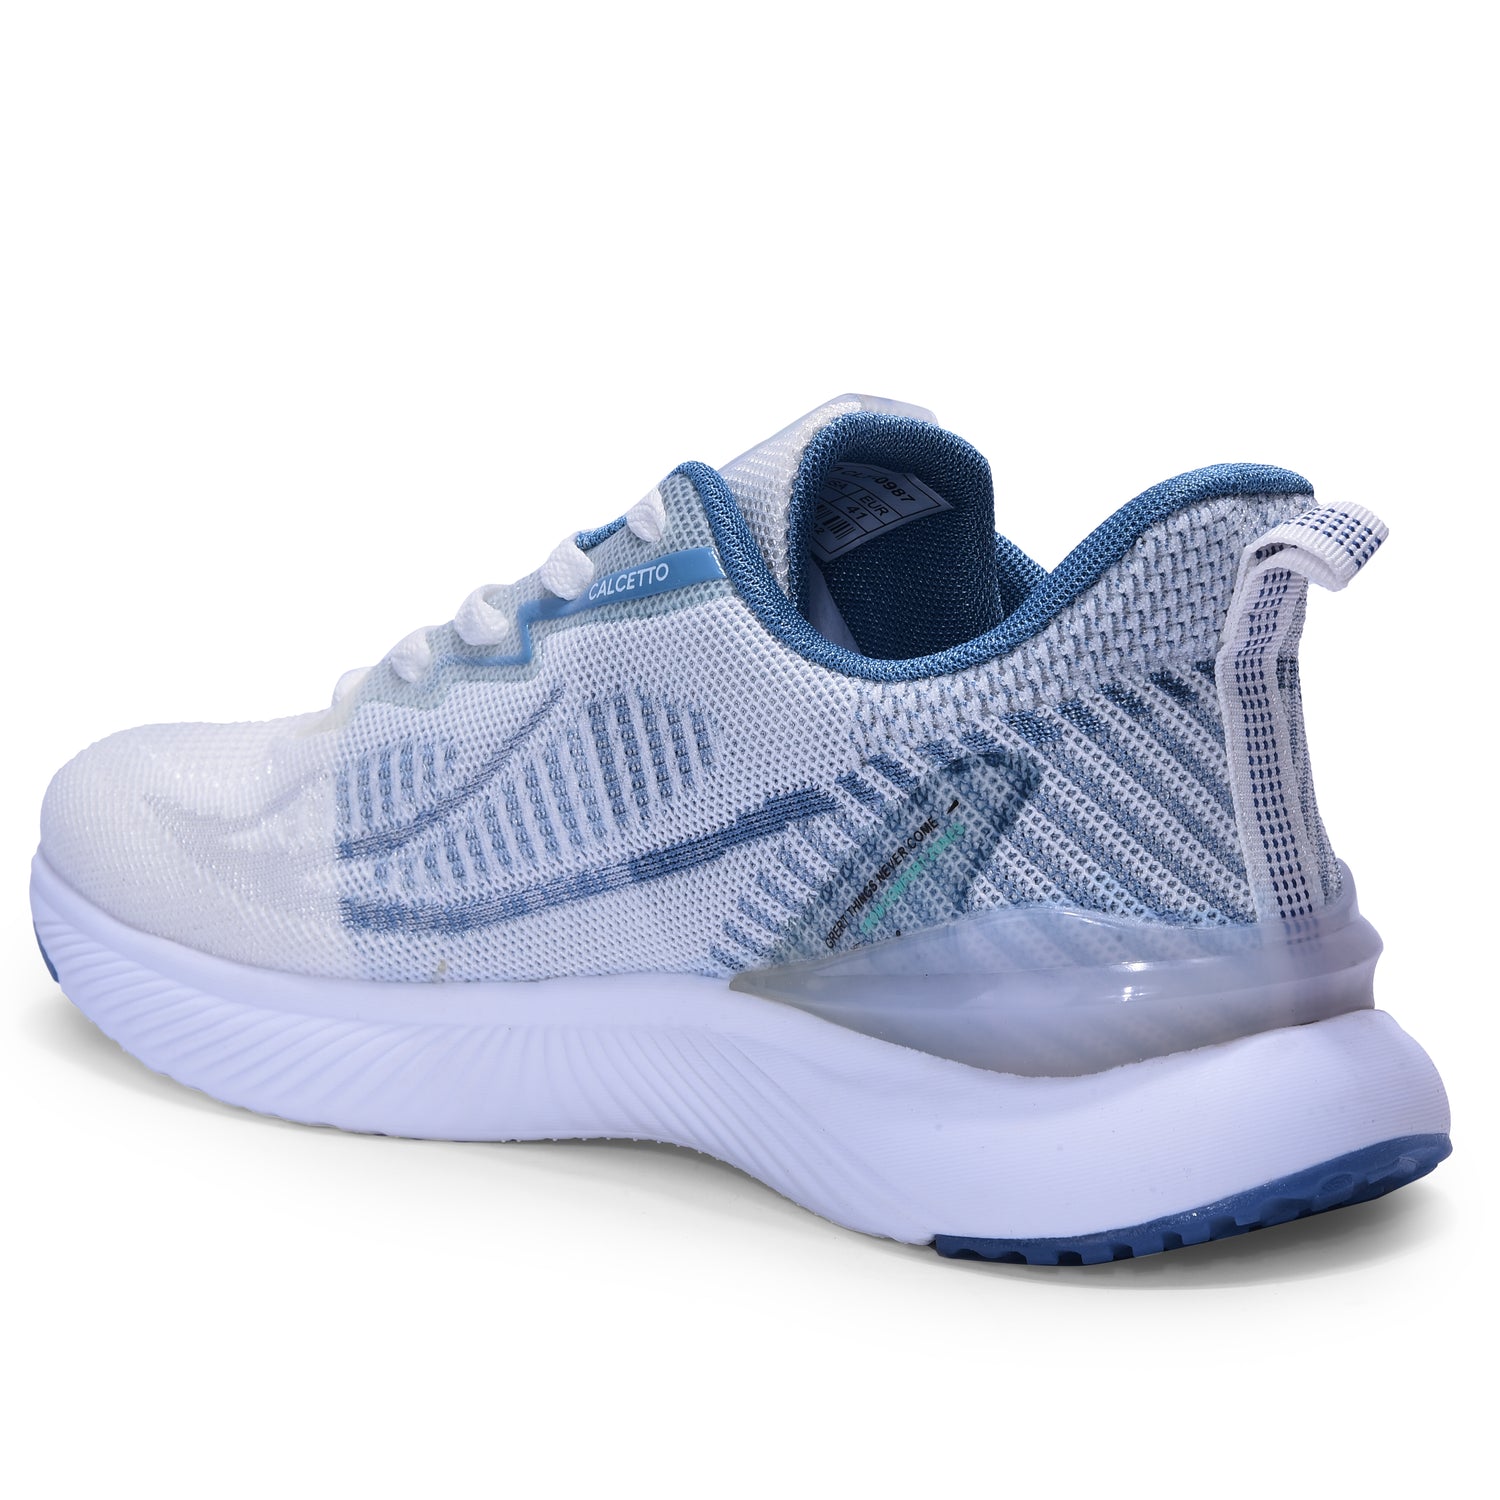 Calcetto CLT-0987 White Blue Running Shoe For Men